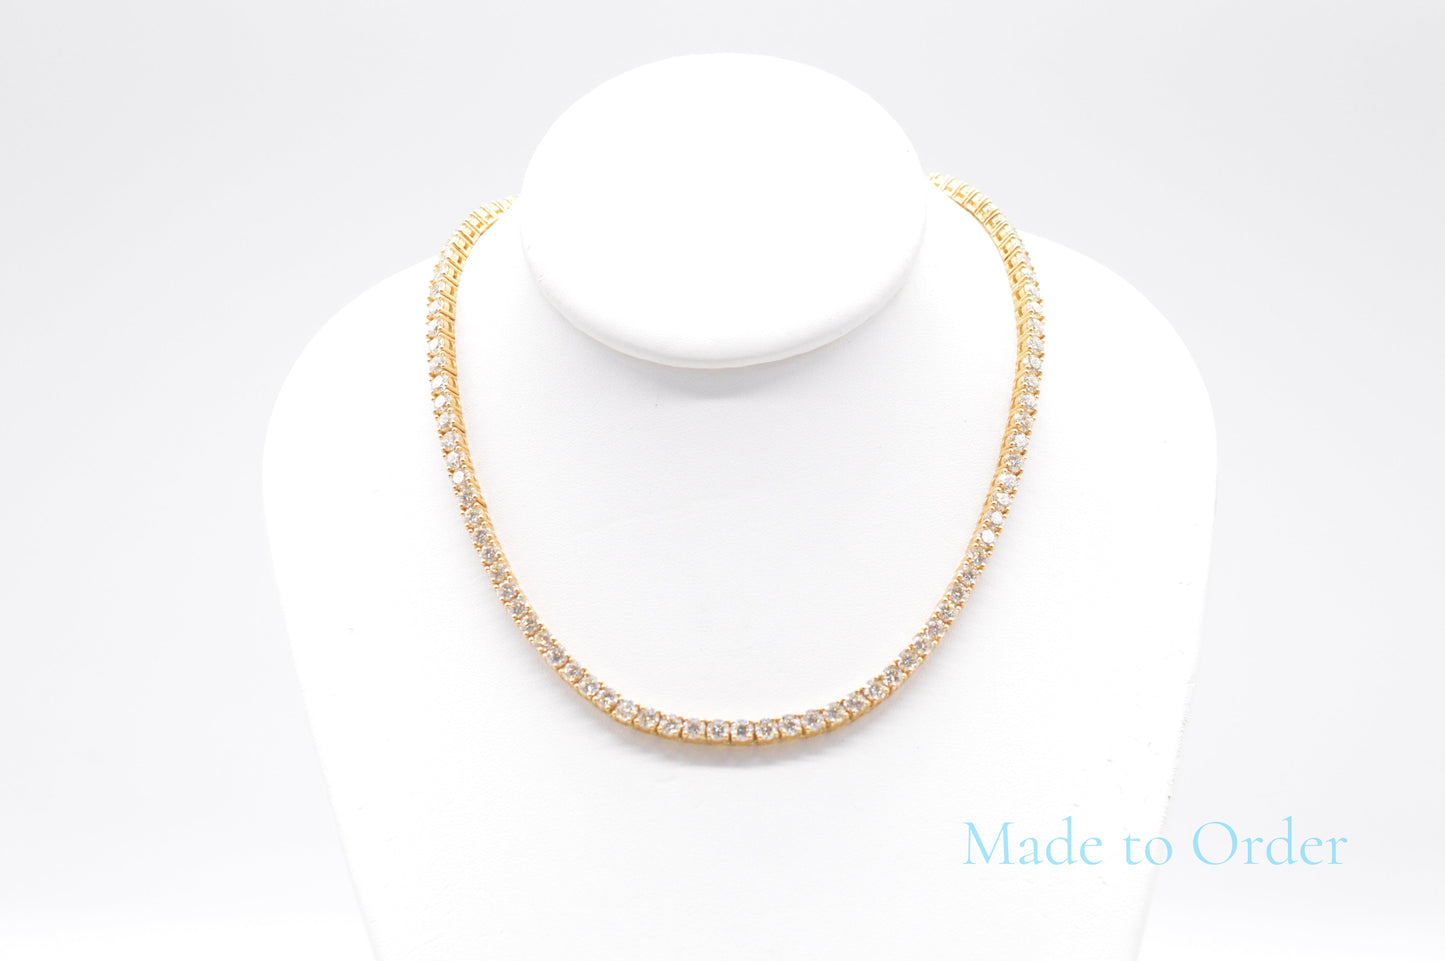 4.5mm Made to Order Natural Diamond Tennis Chain 14K Made to Order Natural Tennis Chains